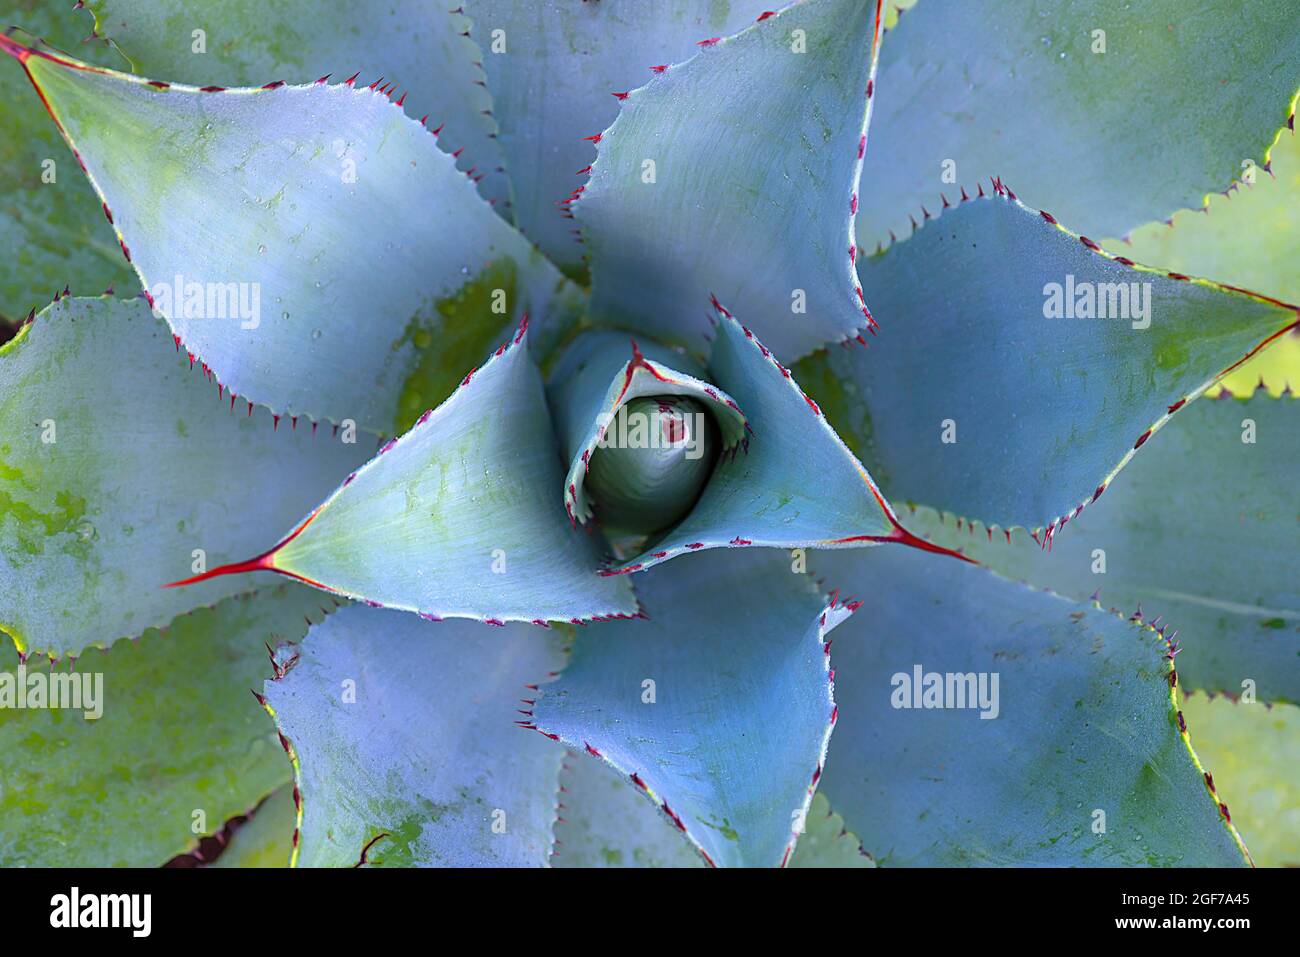 Aloes (Aloe), leaf rosette, growth form from above, Botanical Garden, Bavaria, Germany Stock Photo